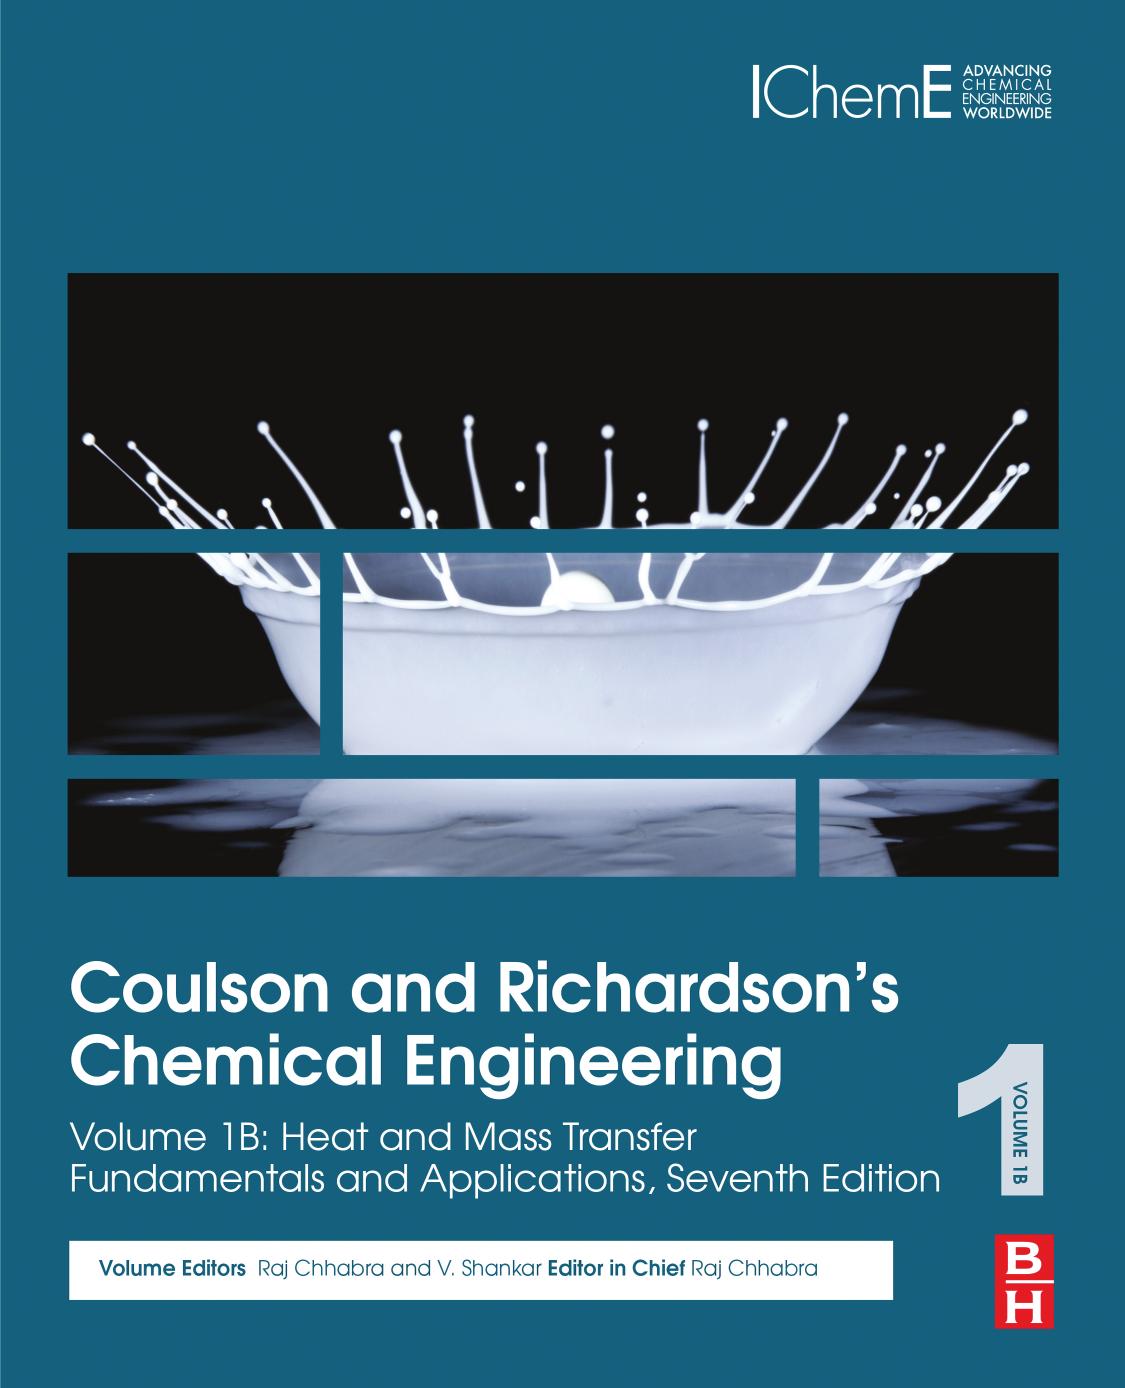 Coulson and Richardson's Chemical Engineering: Volume 1B: Heat Transfer and Mass Transfer: Fundamentals and Applications